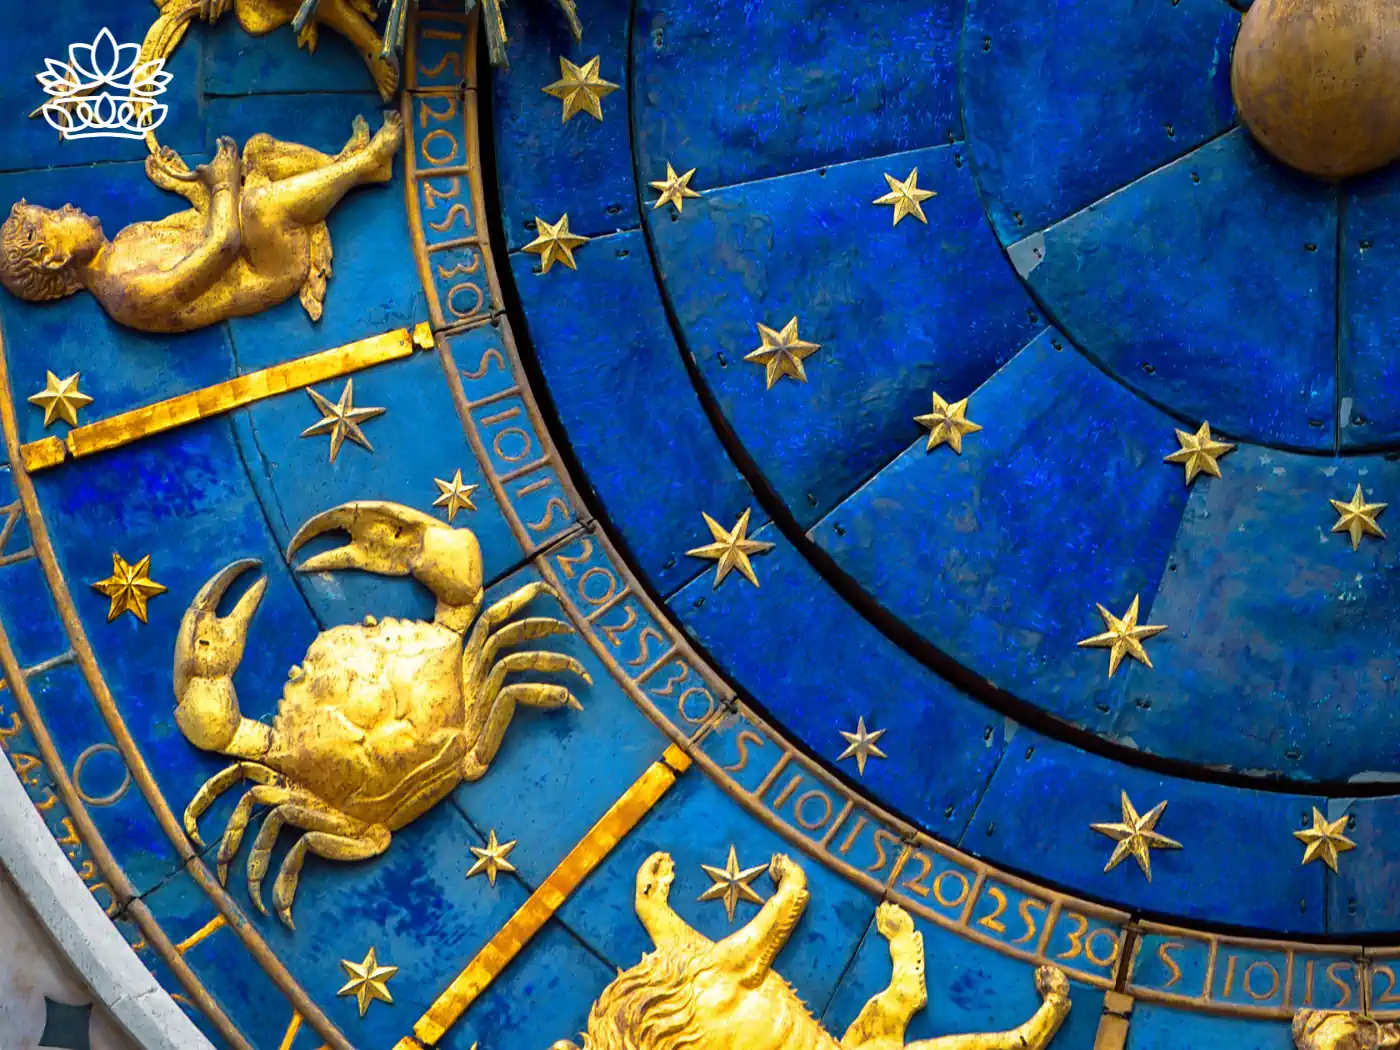 The Cancer zodiac sign in an intricate golden design on a blue background - Fabulous Flowers and Gifts.